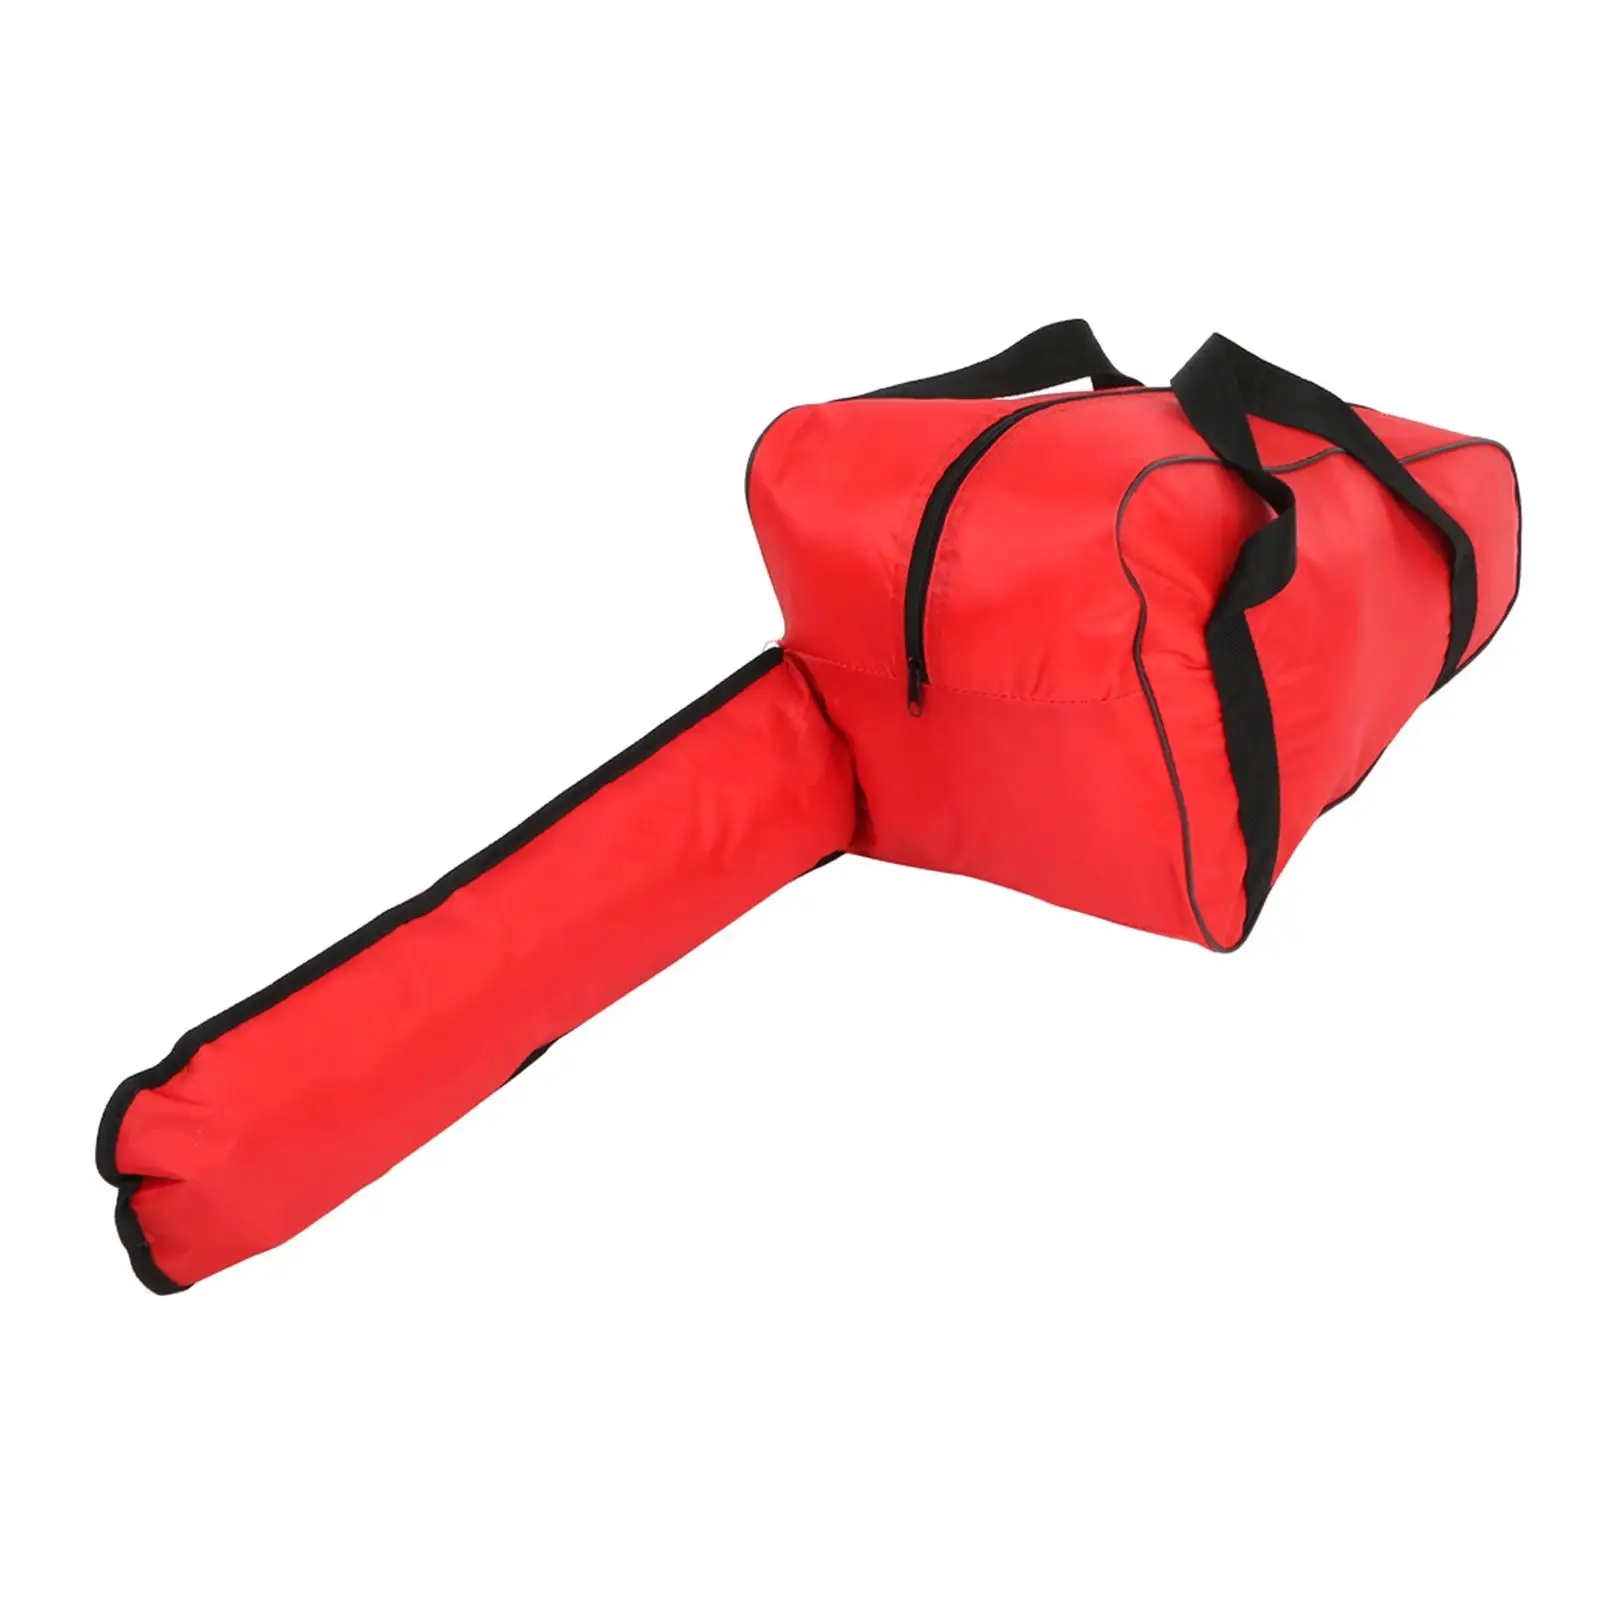 Multipurpose Chainsaw Carrying Bag Case Oxford Cloth with Carry Handles Chainsaw Stand Bag Holdall Bag for Outdoor Woodworking